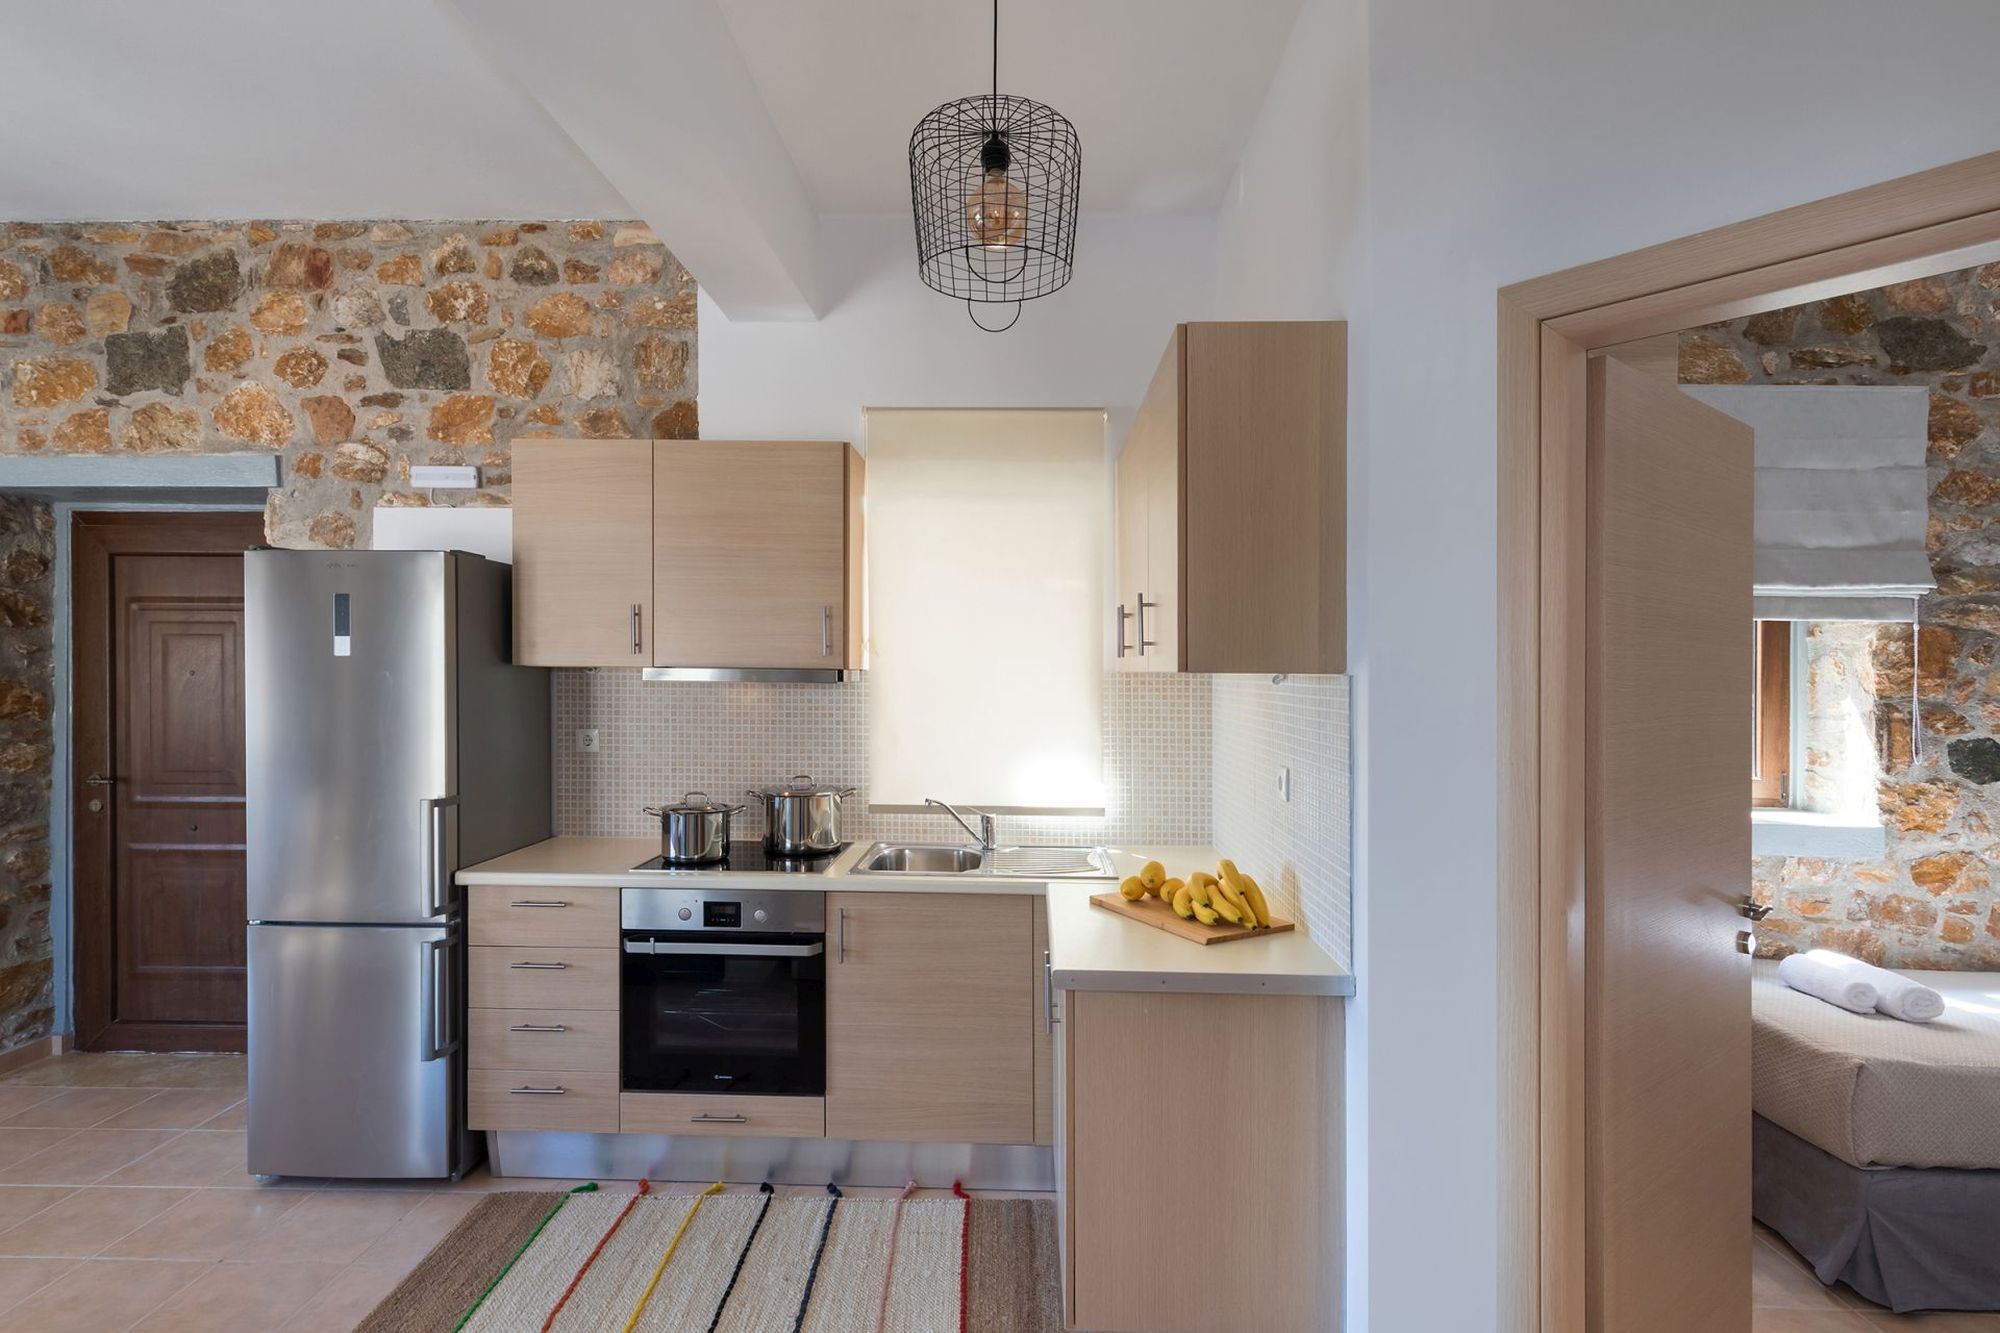 Modern kitchen in a stone built Syra Suite residence equipped with a big inox fridge and an electric cooker oven.